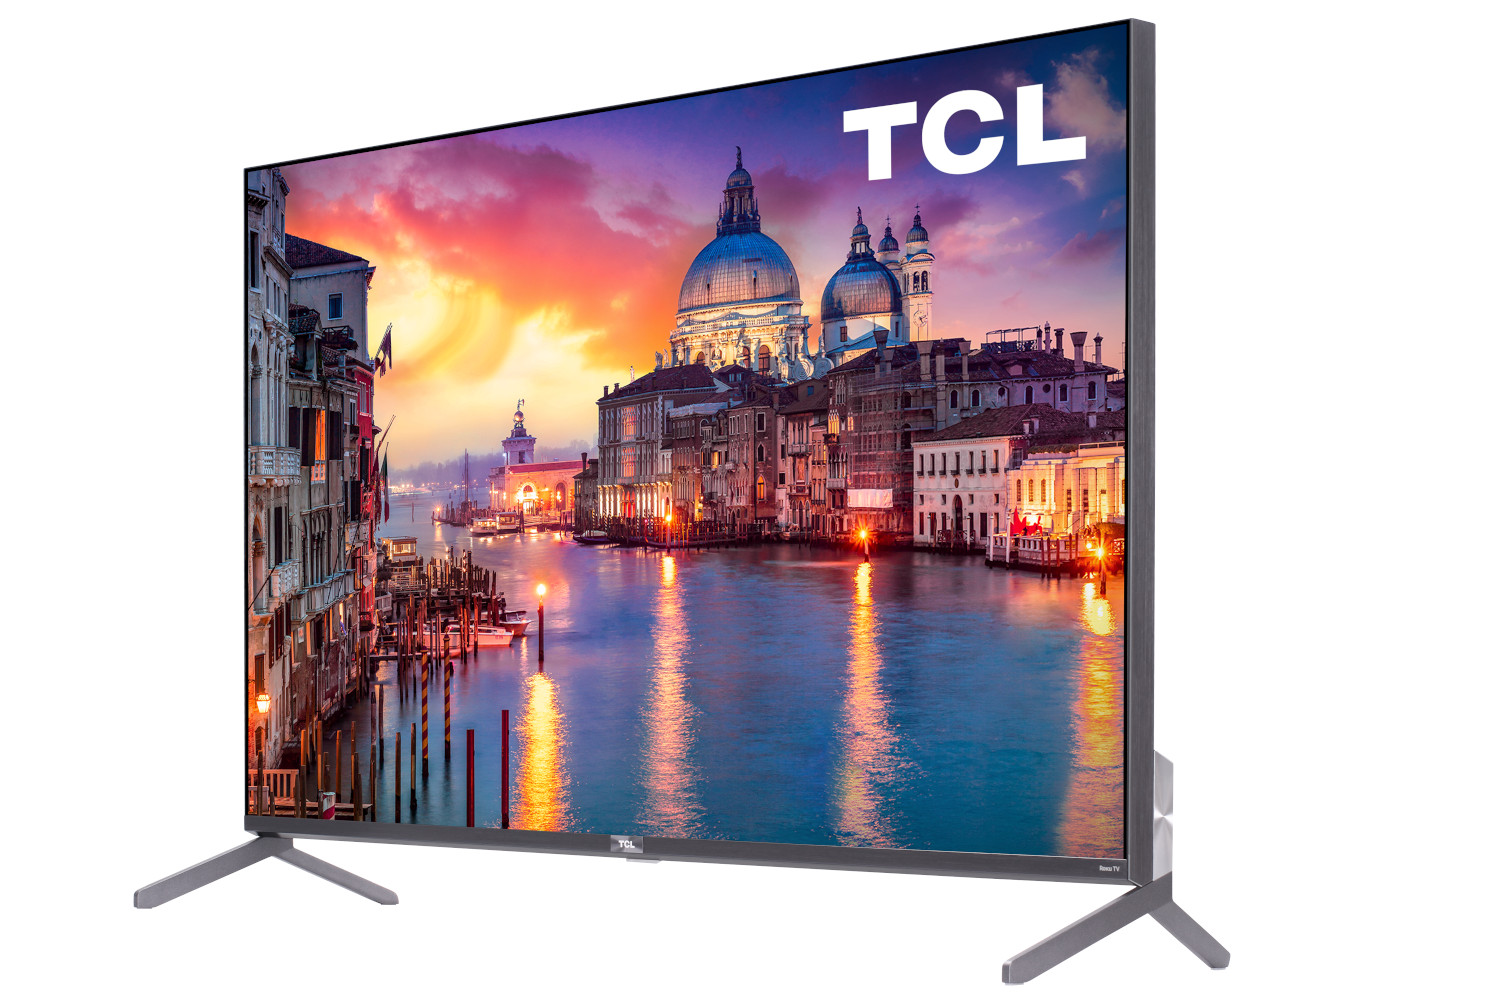 tcl 2019 8 series 6 5 released details pricing 55r625 angled right hero